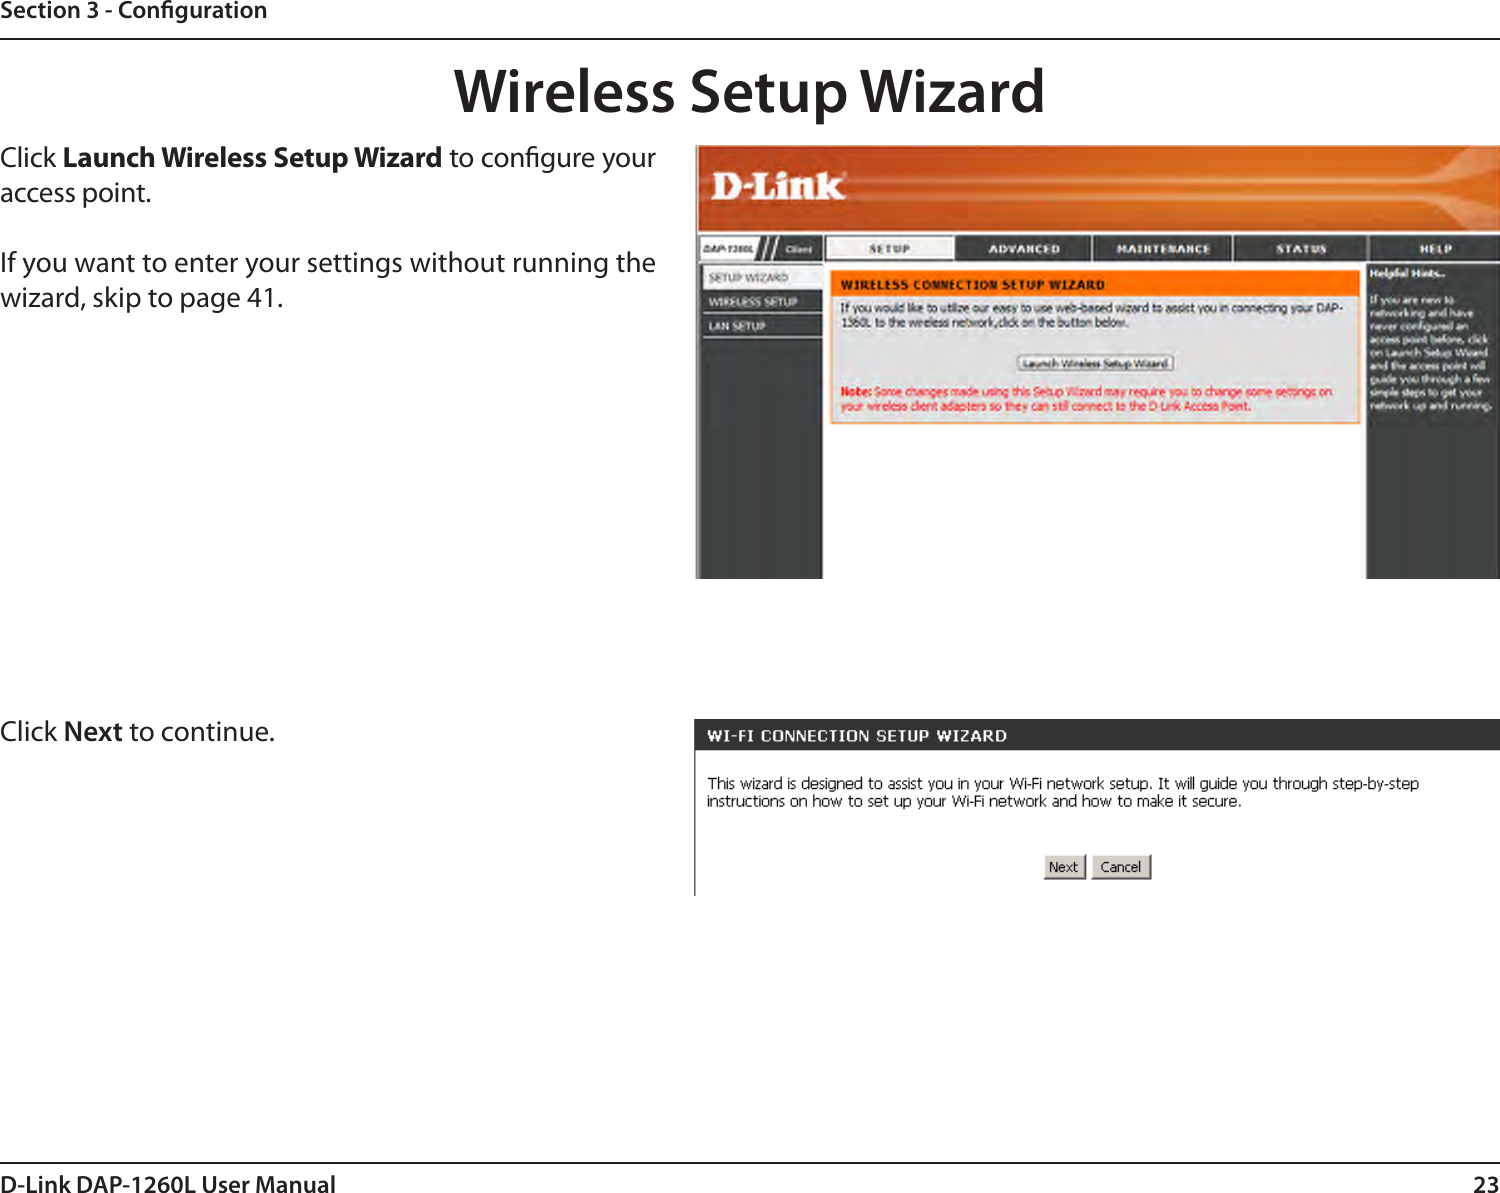 23D-Link DAP-1260L User ManualSection 3 - CongurationClick Launch Wireless Setup Wizard to congure your access point.If you want to enter your settings without running the wizard, skip to page 41.Wireless Setup WizardClick Next to continue. 